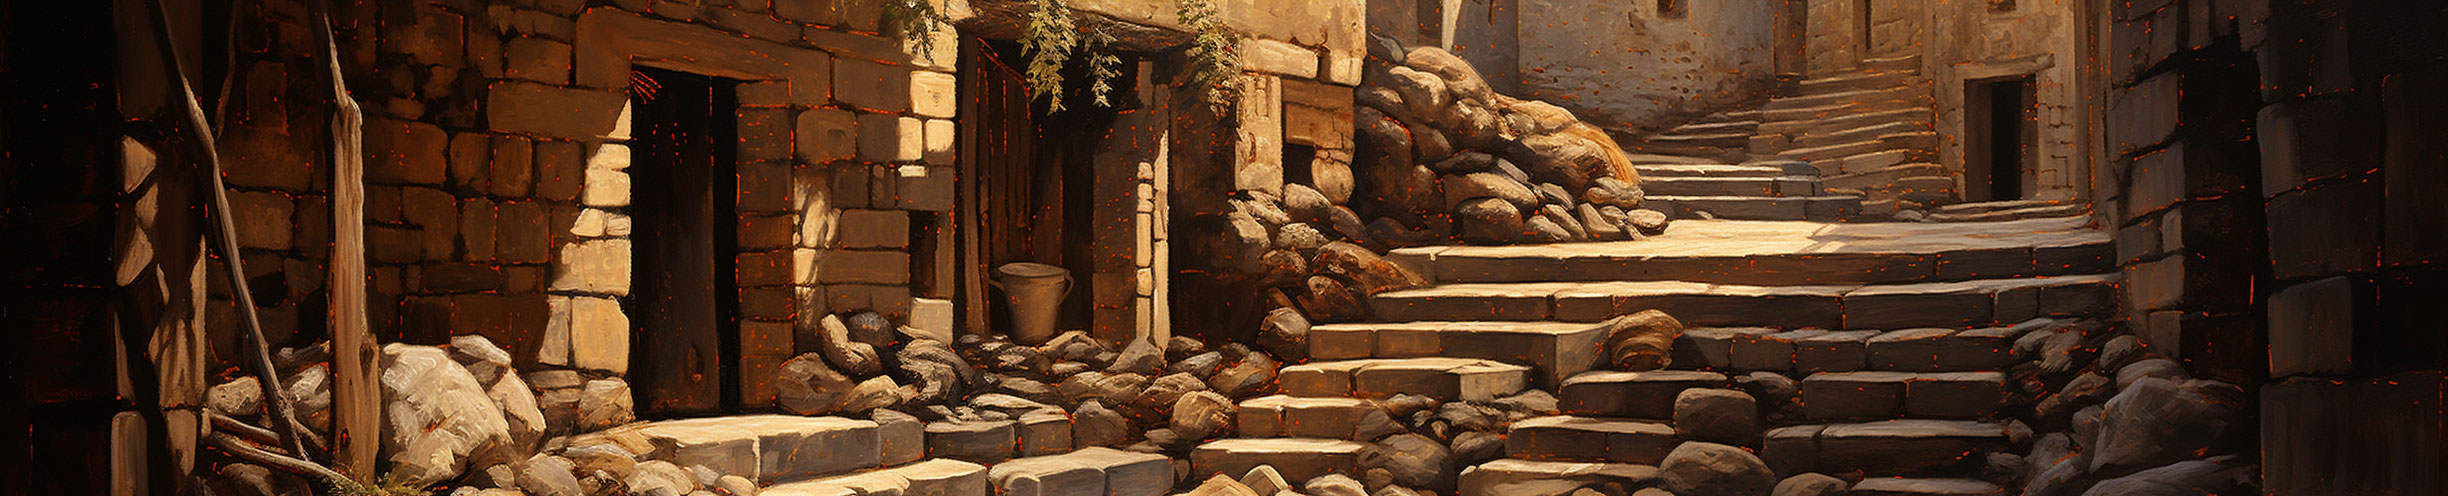 tychodreq_a_finely_detailed_oil_painting_of_a_stone_stairs_lead_dbca91e9-a469-4b0f-b115-90456d45347c.jpg